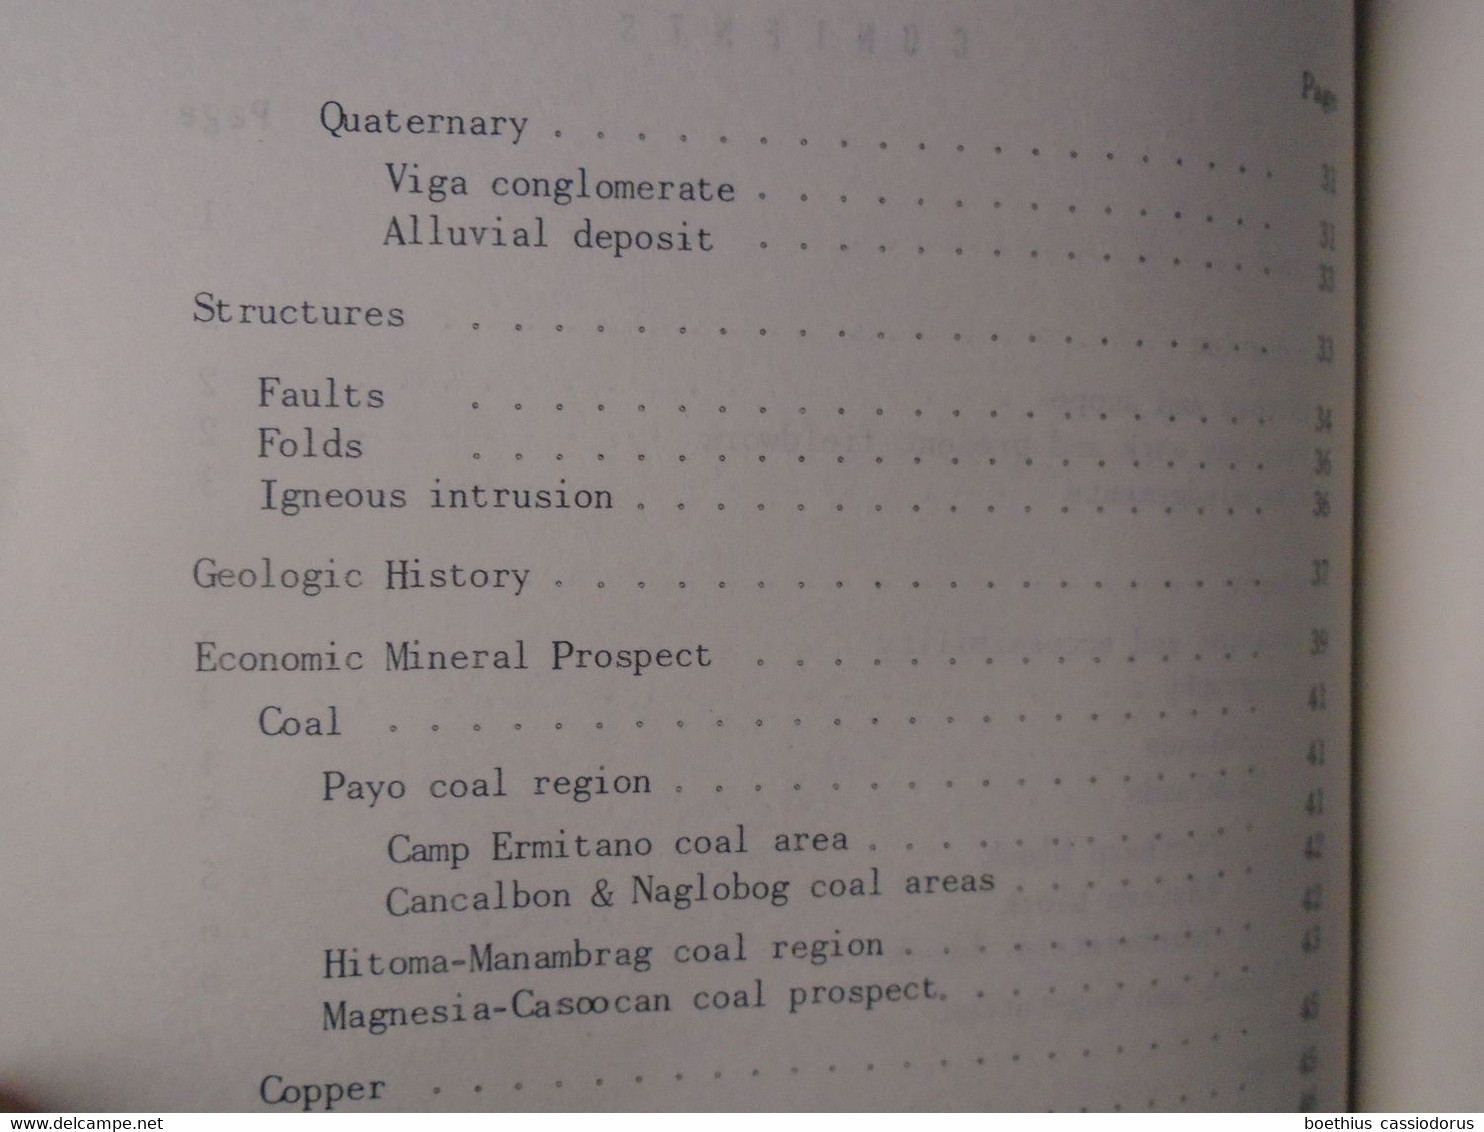 THE GEOLOGY AND MINERAL RESOURCES OF CATANDUANES PROVINCE BY FEDERICO E. MIRANDA & BASSANIO S. VARGAS 1967 PHILIPPINES - Aardwetenschappen